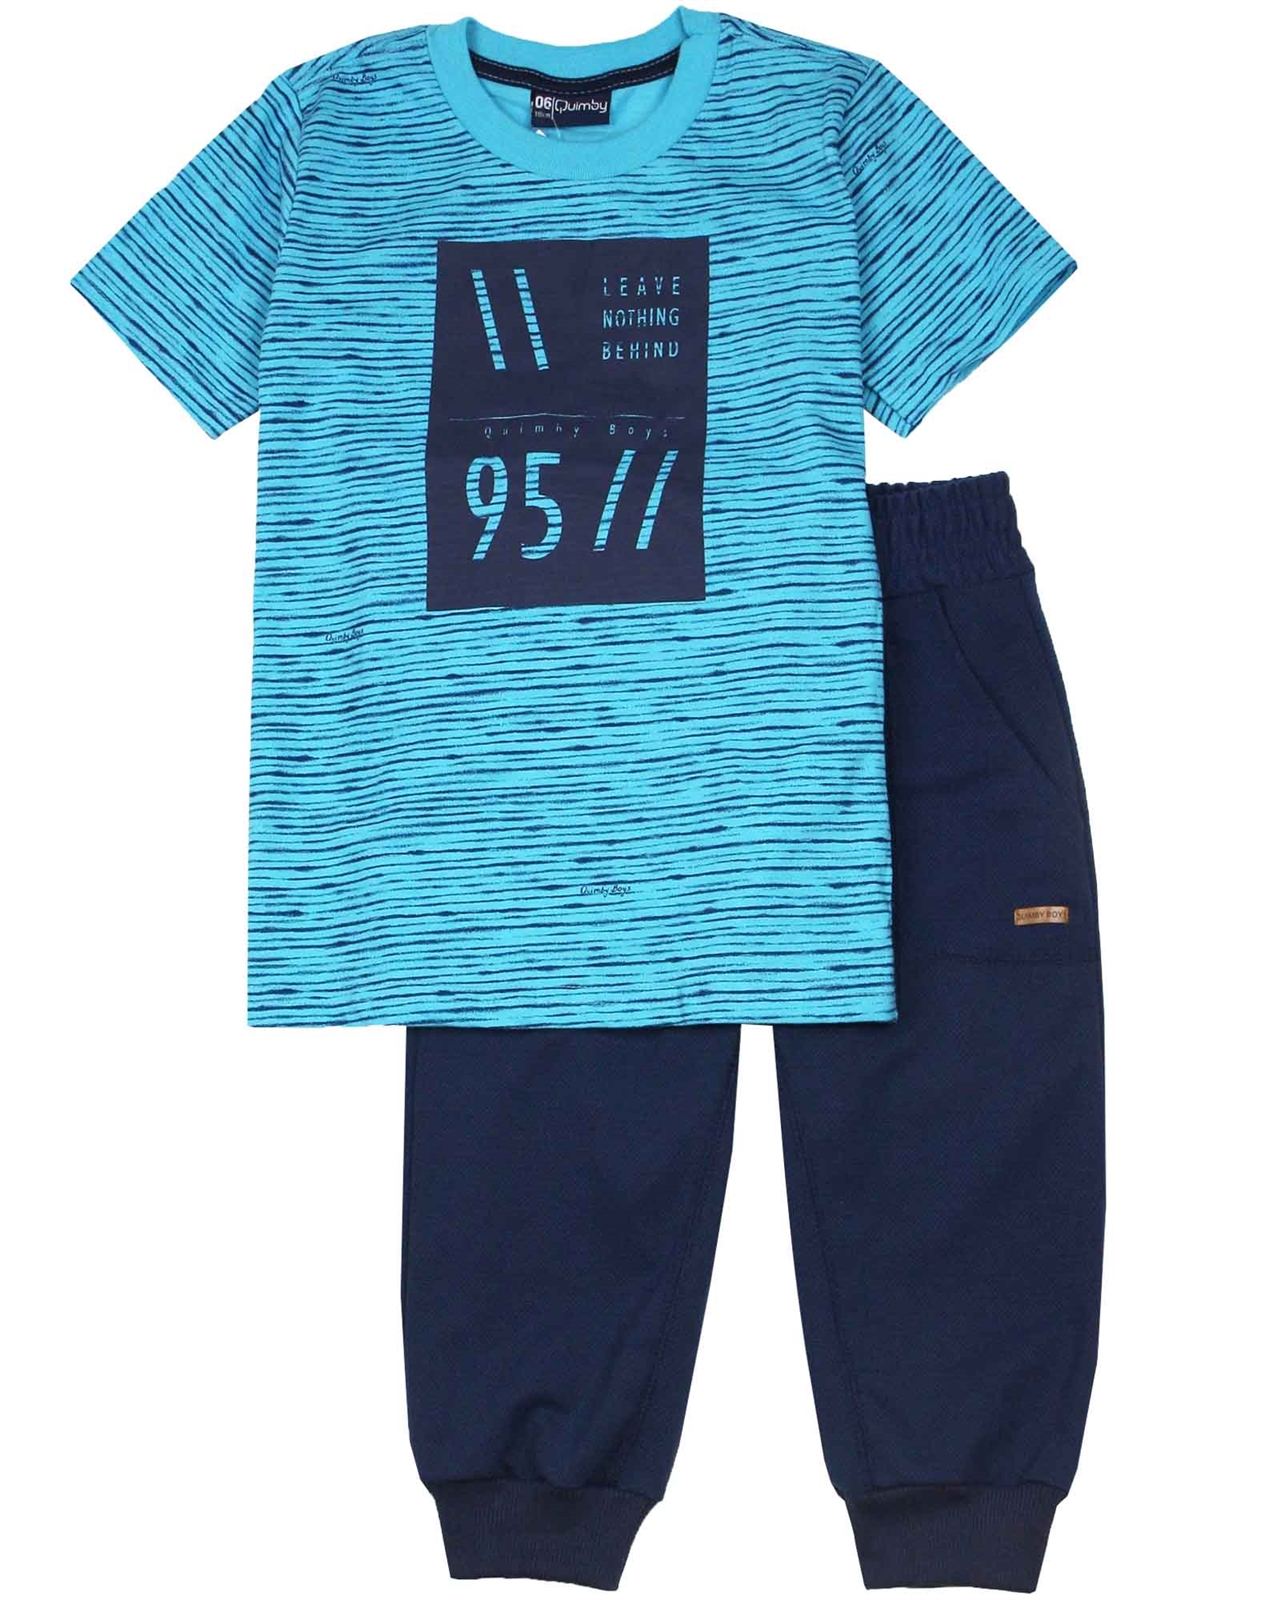 Buy Softy Jeans Cotton Printed Capri for Boys | Regular Fit, Pants for Boys  (7 Years-8 Years, Black) at Amazon.in